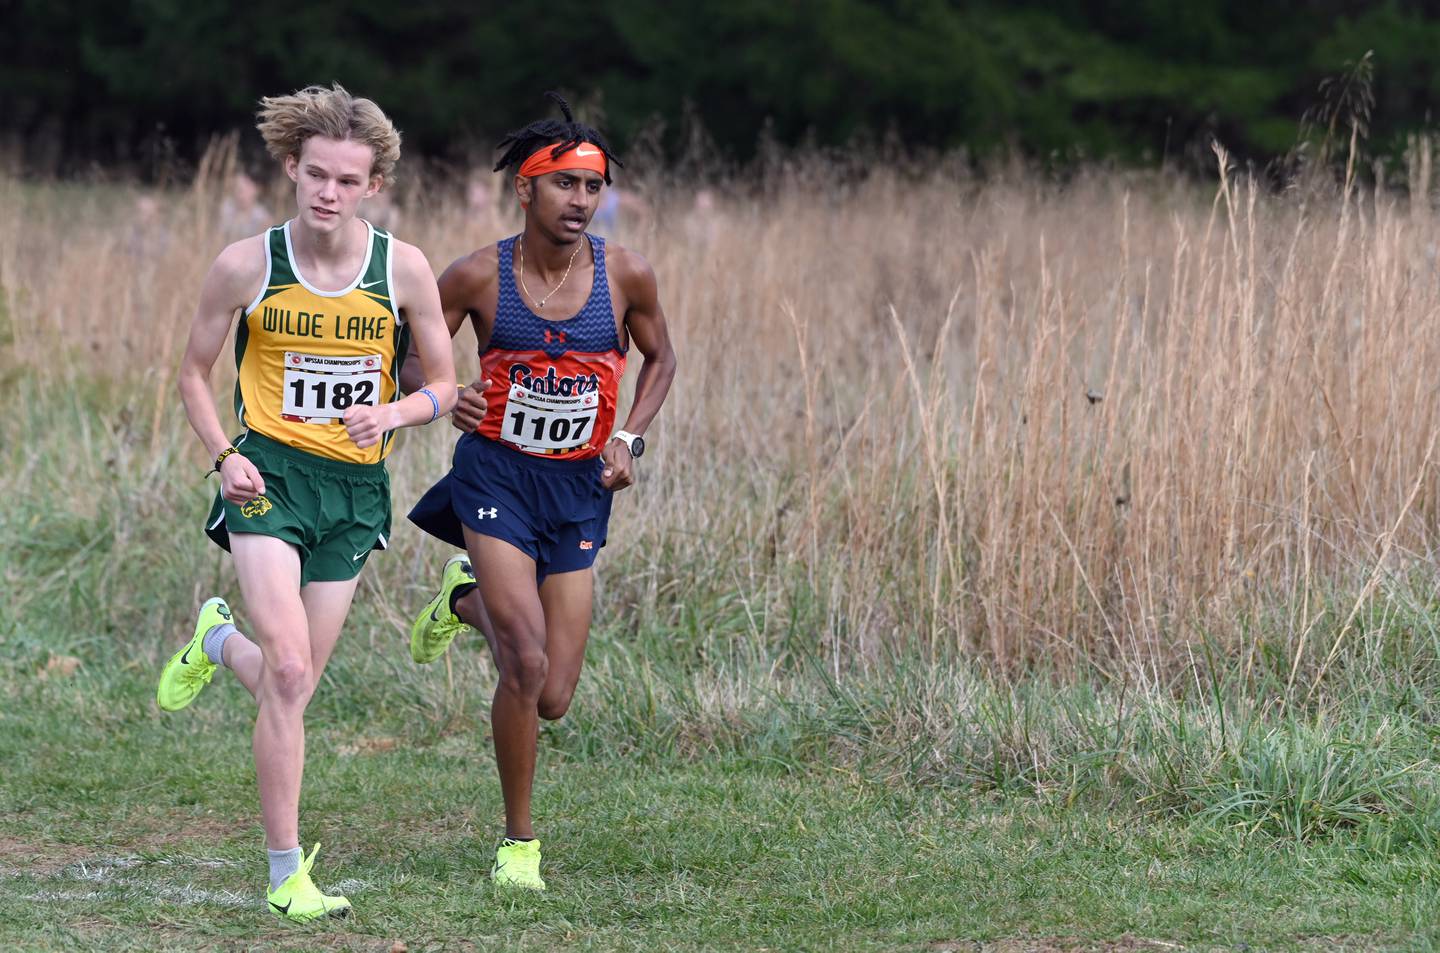 Wilde Lake's Henry Hopper and Reservoir's Kidus Zeleke run side-by-side in the Class 3A boys race during the cross country state championships on Nov. 12. Both are first team All-Howard County selections. 